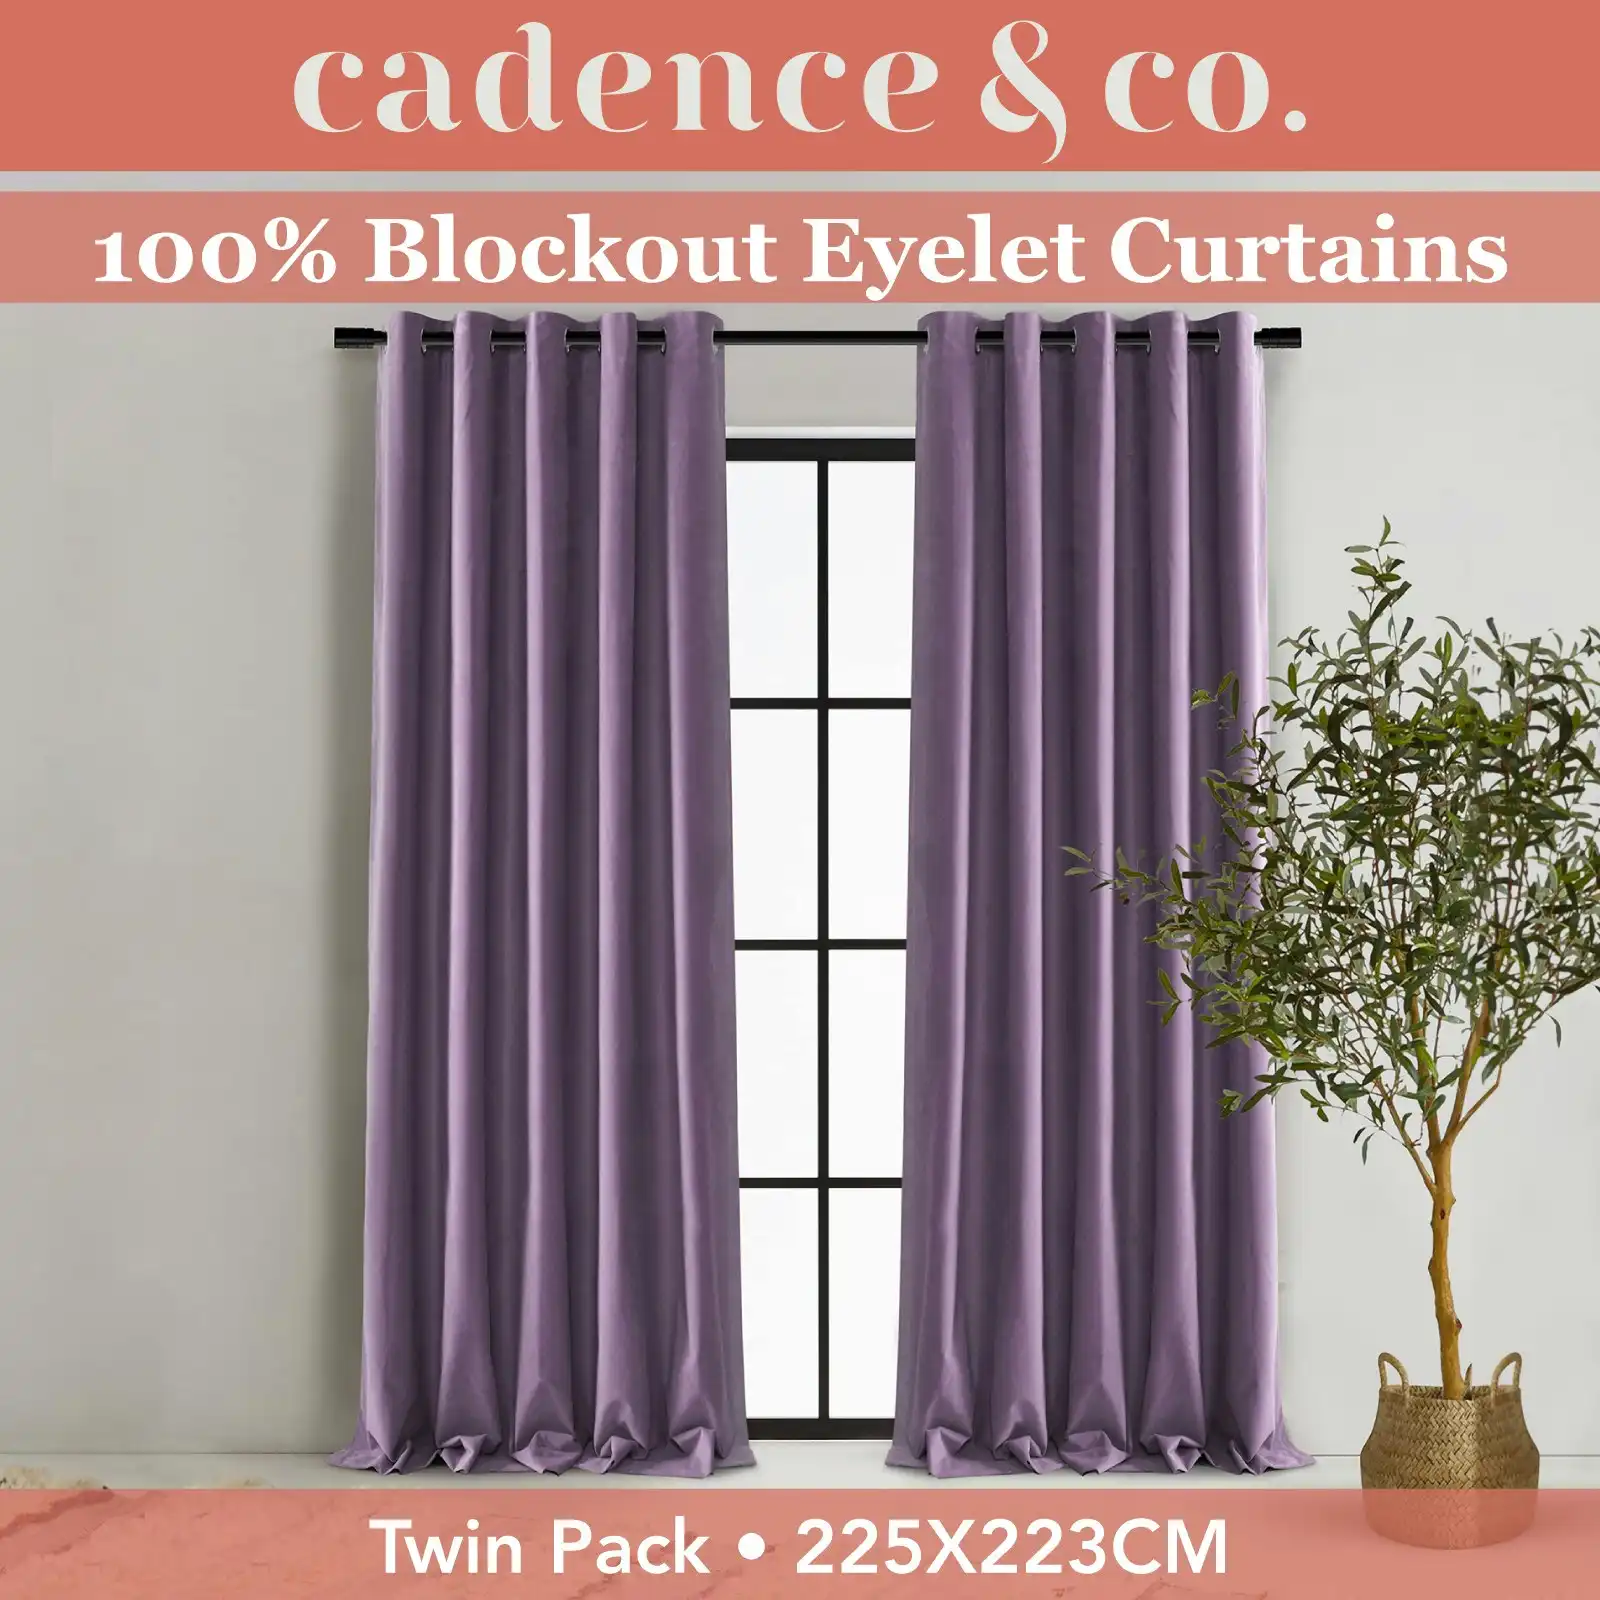 Cadence & Co. Byron Matte Velvet 100% Blockout Eyelet Curtains Twin Pack Lilac 225x223cm